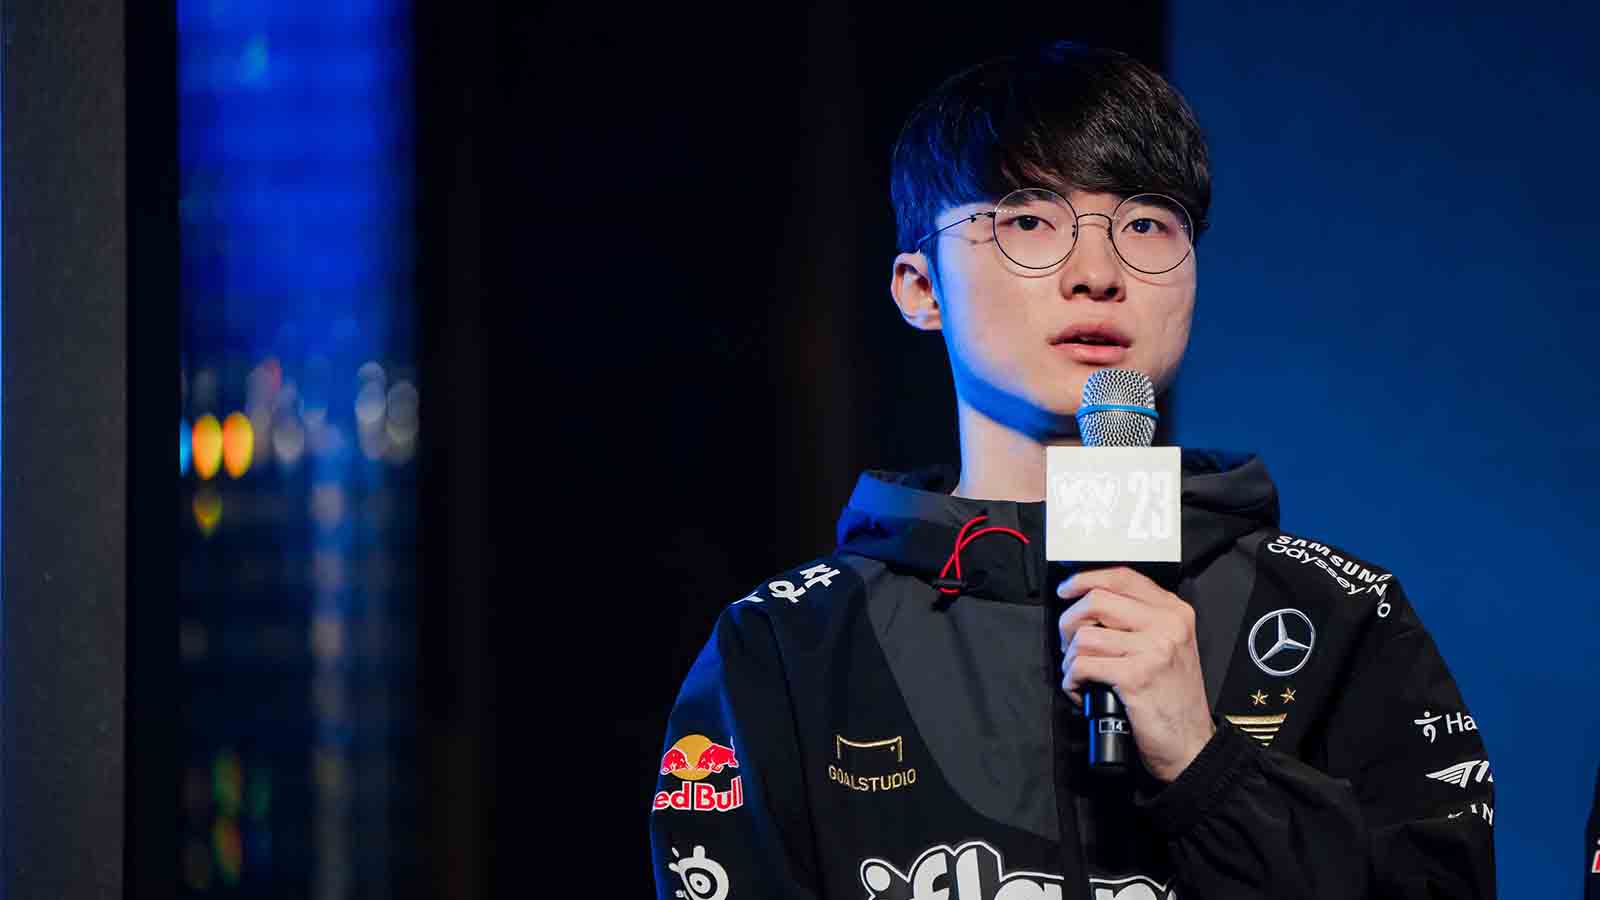 Faker Stream Highlight, Faker Playing Ahri, By League TV